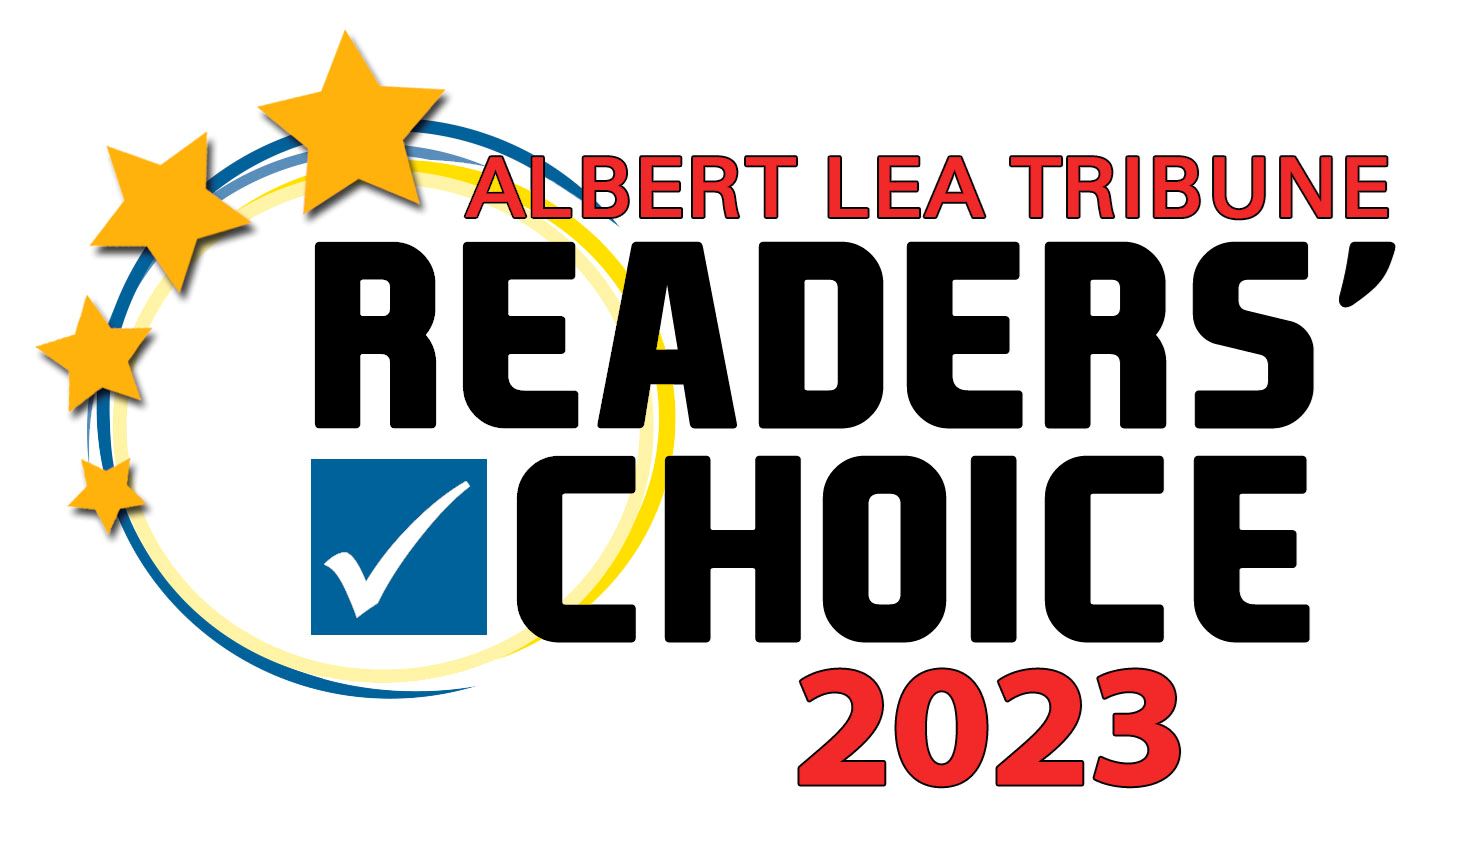 Westfield Topanga and The Village - 2023 Daily News Readers' Choice